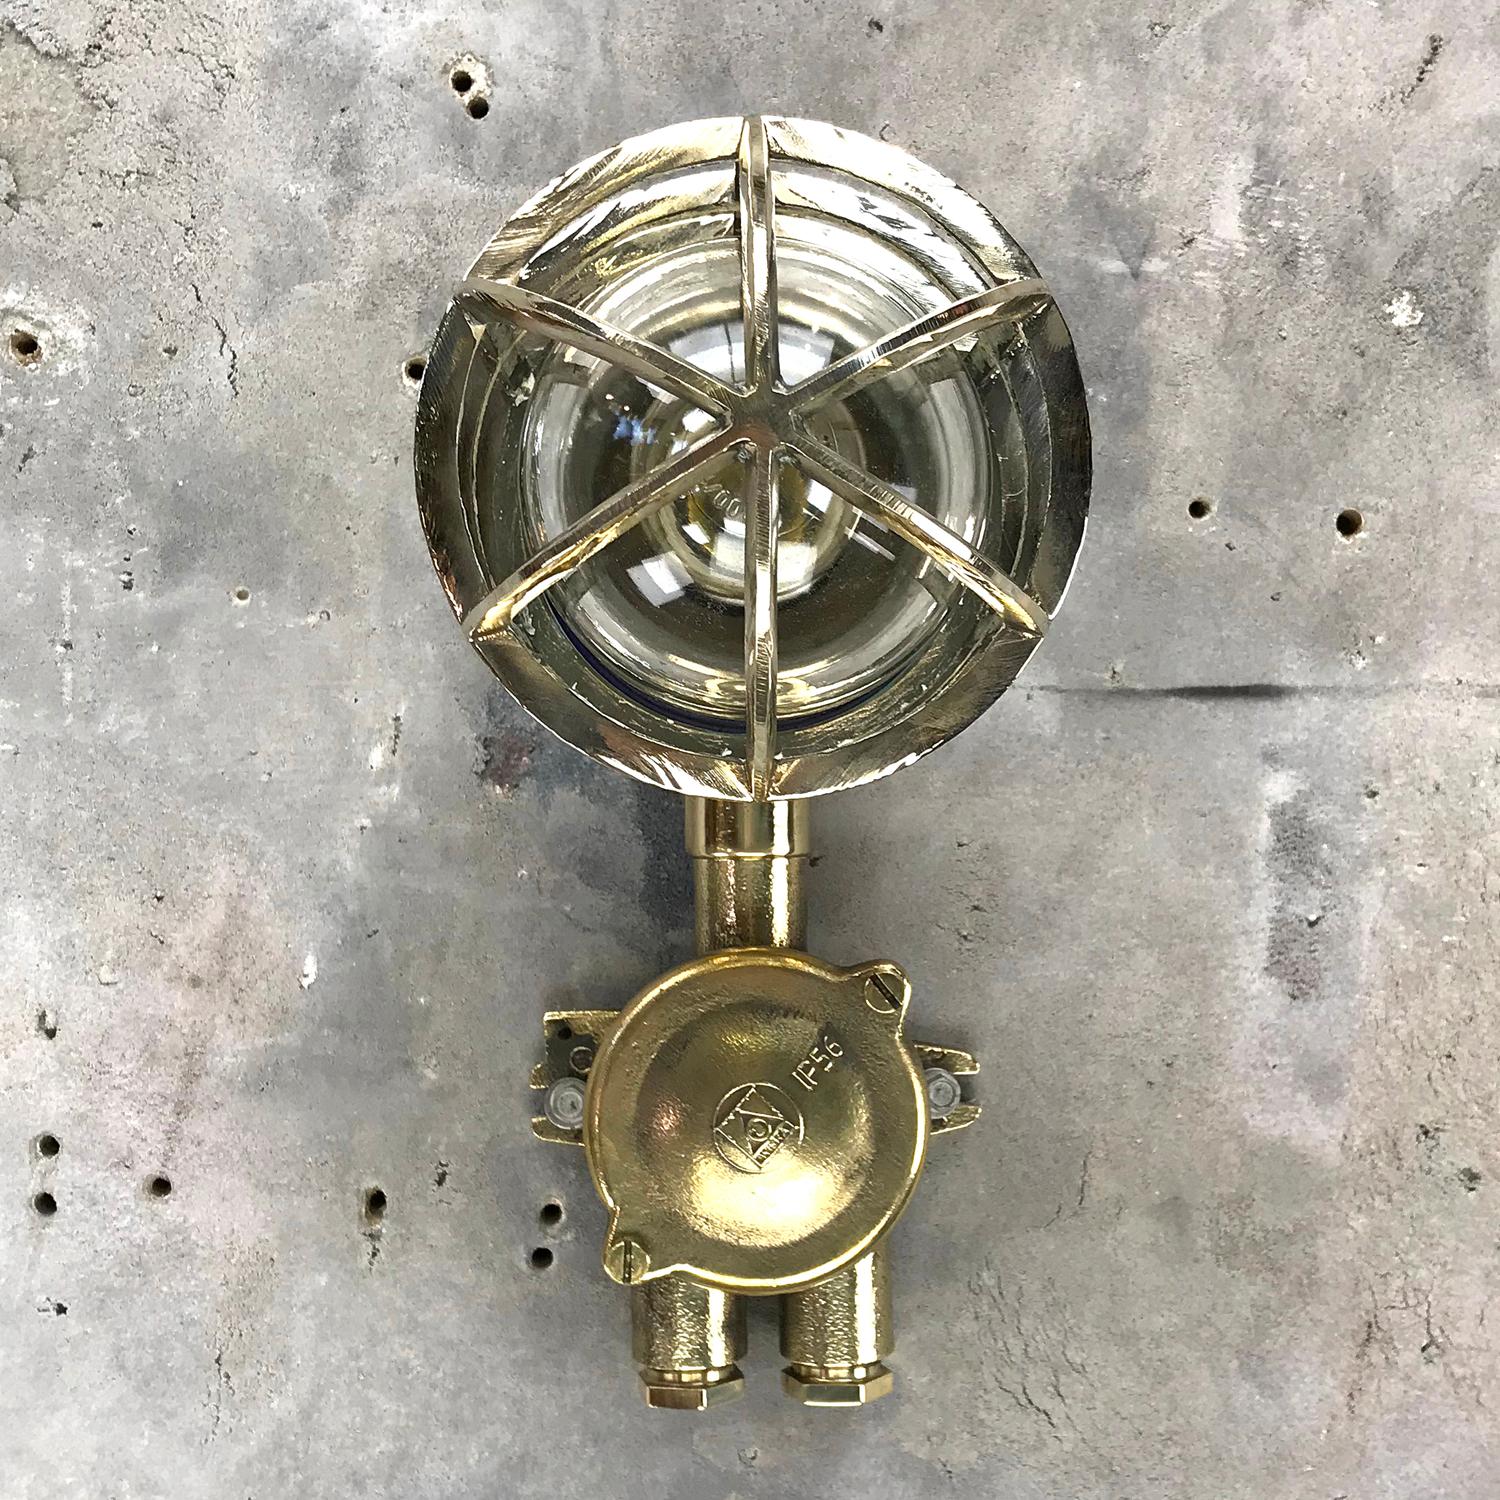 Tempered 1970s German Explosion Proof Wall Light Cast Brass, Glass Shade and Junction Box